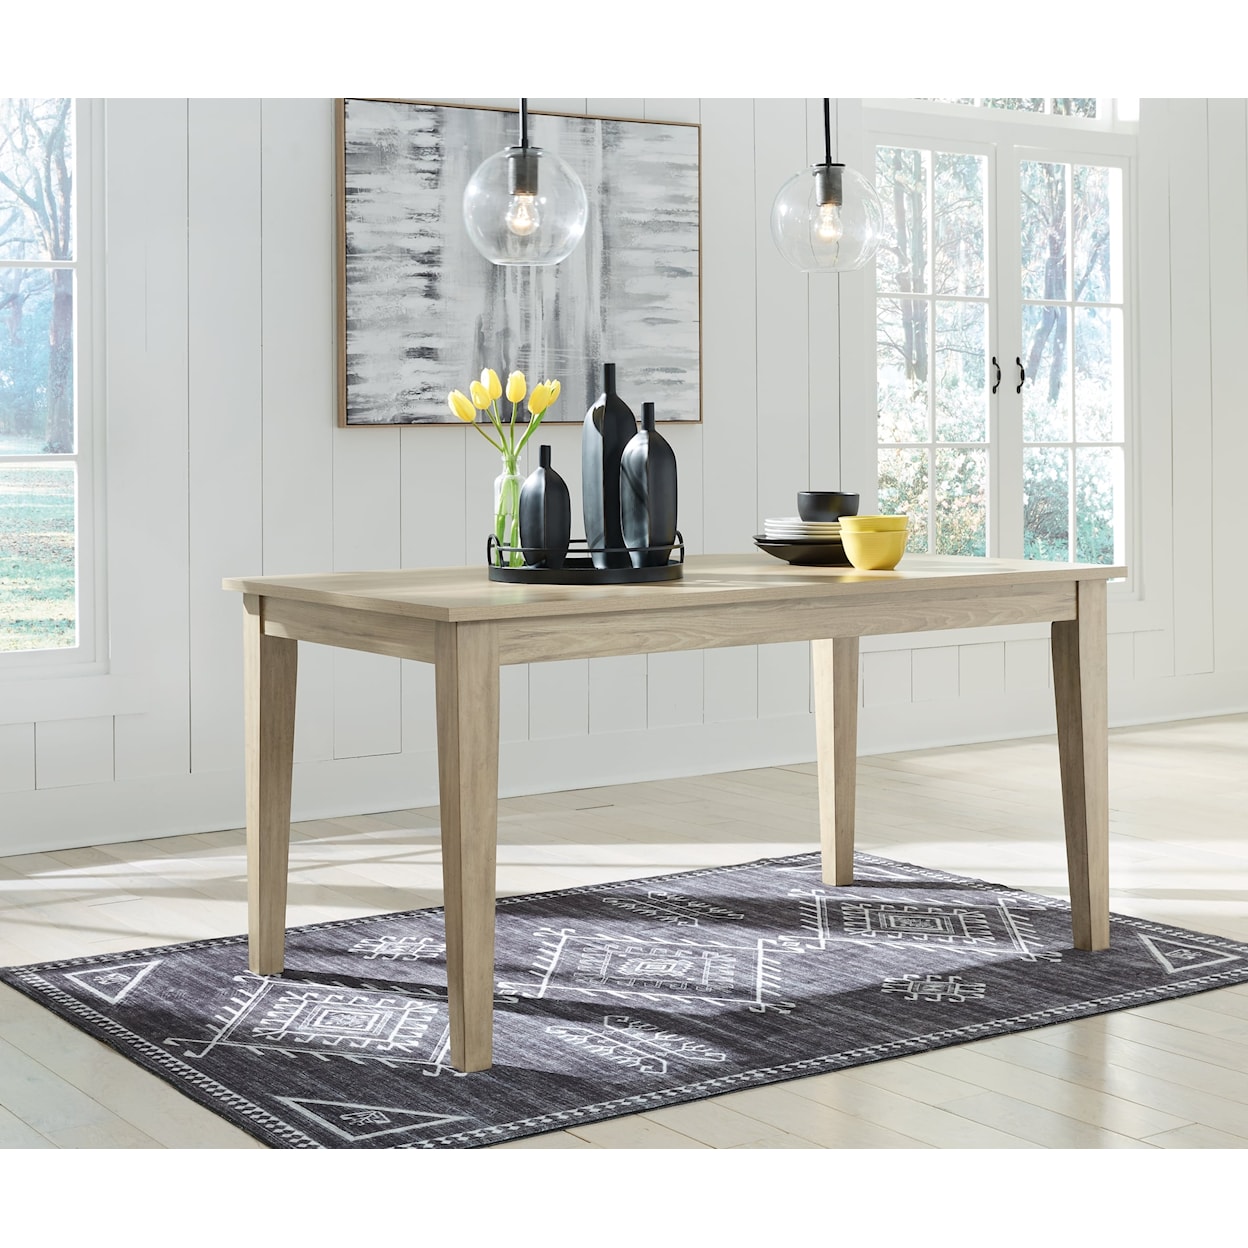 Signature Design by Ashley Gleanville Dining Table